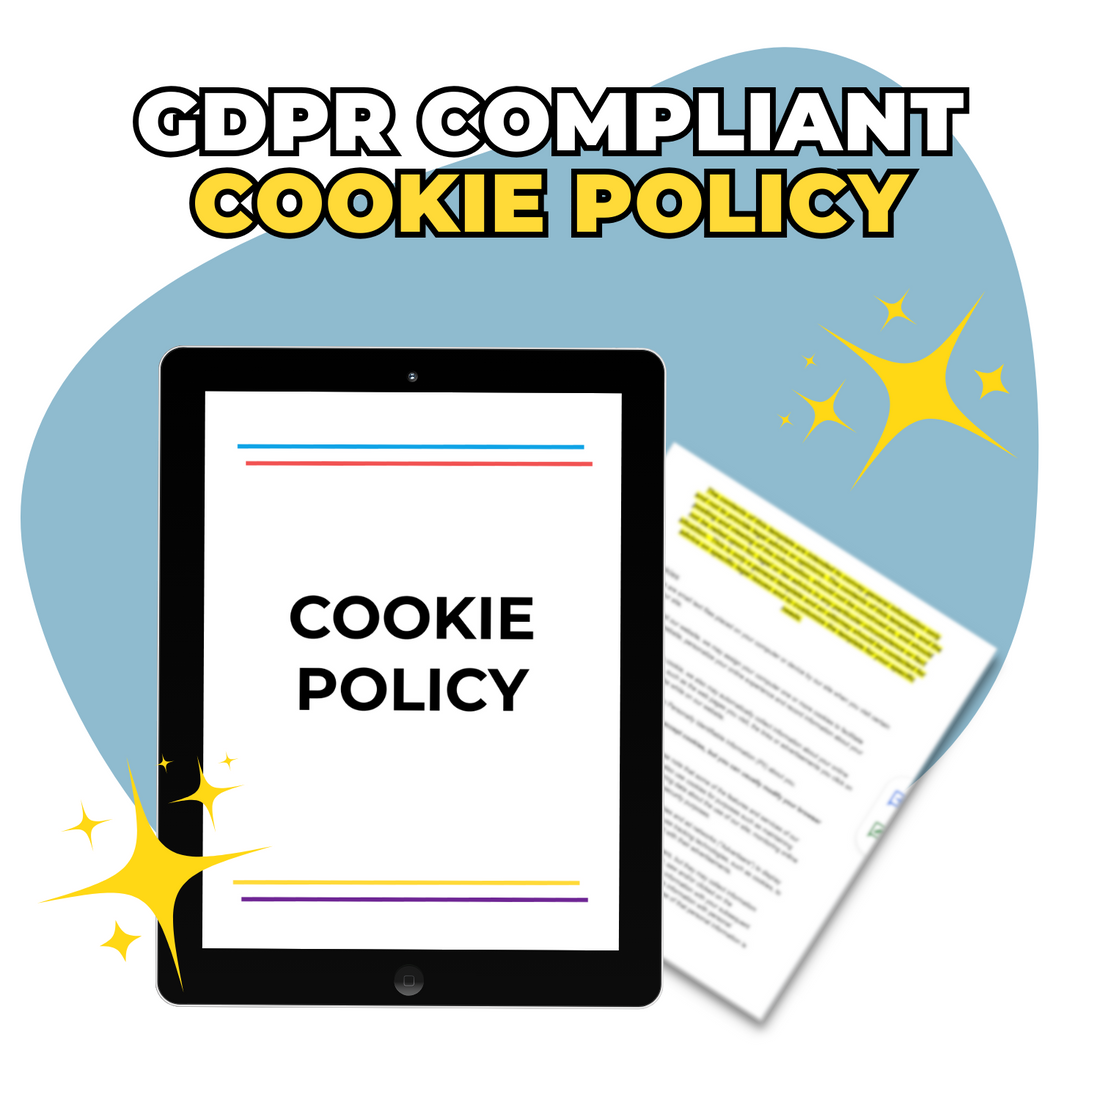 Tablet displaying &quot;Cookie Policy Template&quot; from the ElizabethStapleton.com Website Legal Templates Bundle, with a banner overhead saying &quot;GDPR compliant cookie policy&quot; and sparkles around.